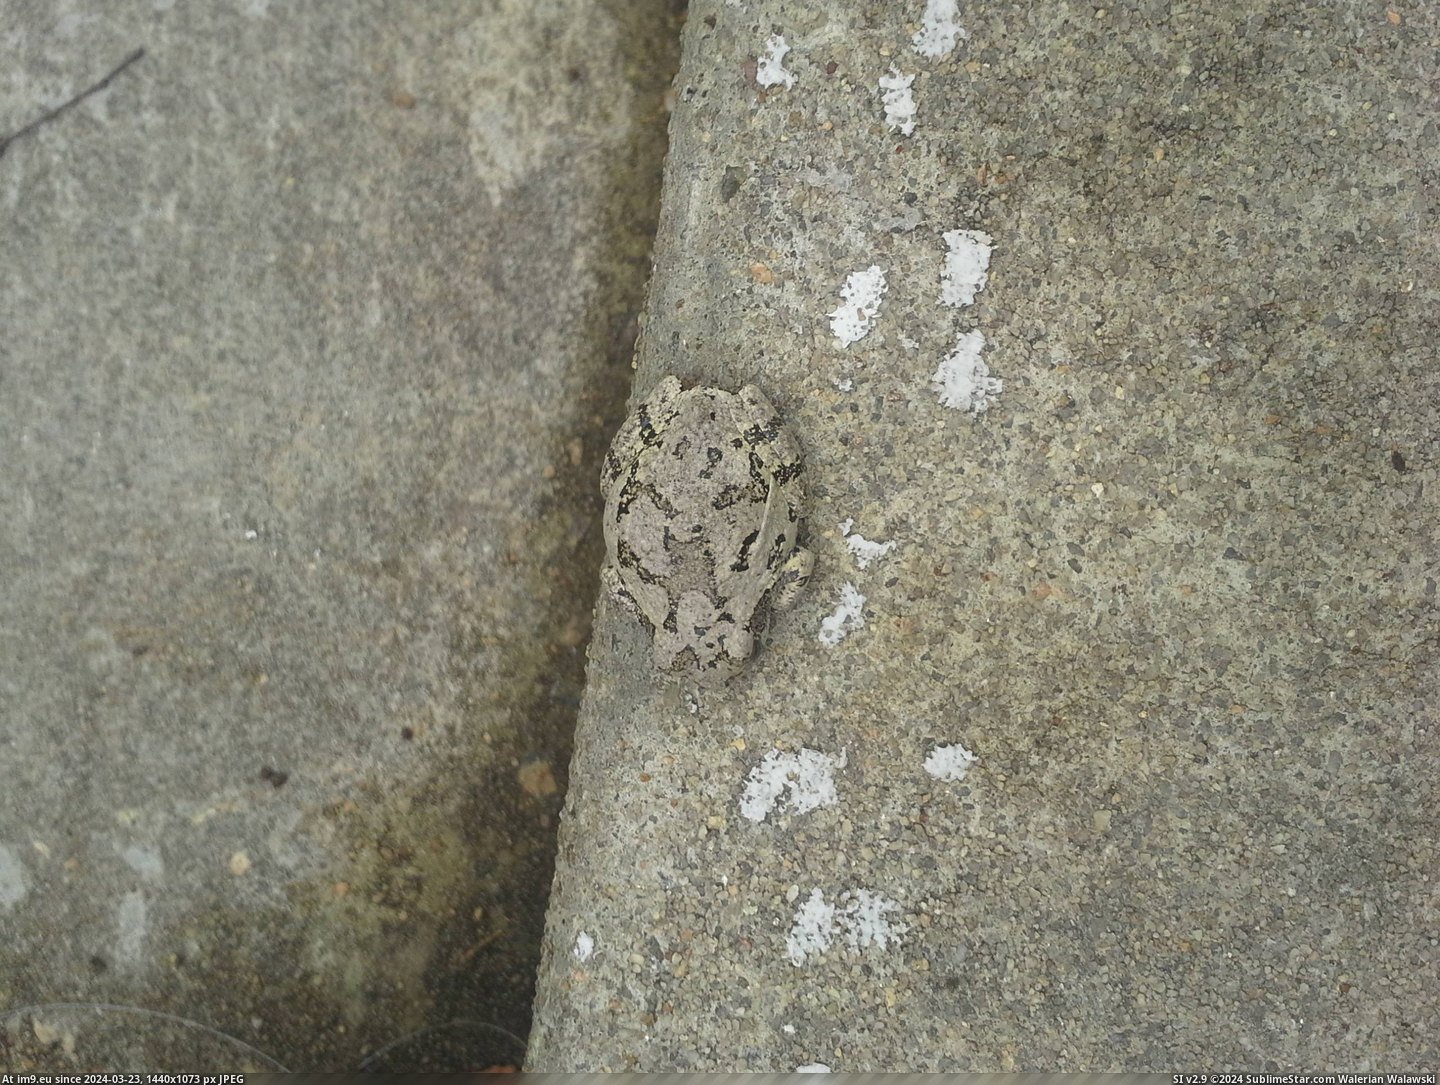 #Local #Any #Toad #Camouflaged #Sidewalk #Fauna [Mildlyinteresting] This toad is better camouflaged on the sidewalk than in any of the local fauna. Pic. (Bild von album My r/MILDLYINTERESTING favs))